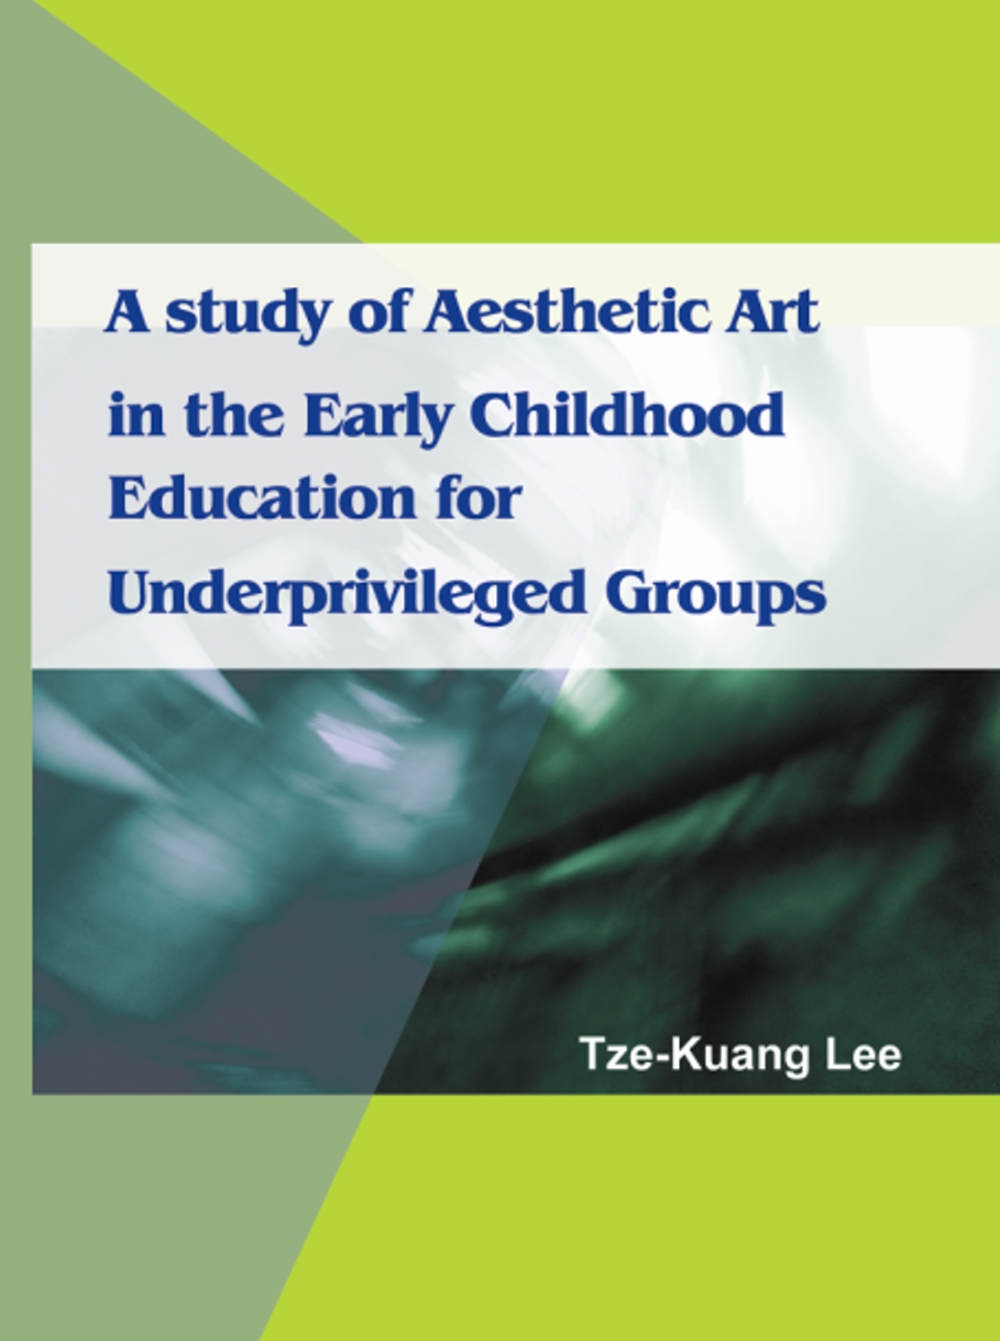 A study of Aesthetic Art in the Early Childhood education for Underprivileged gr